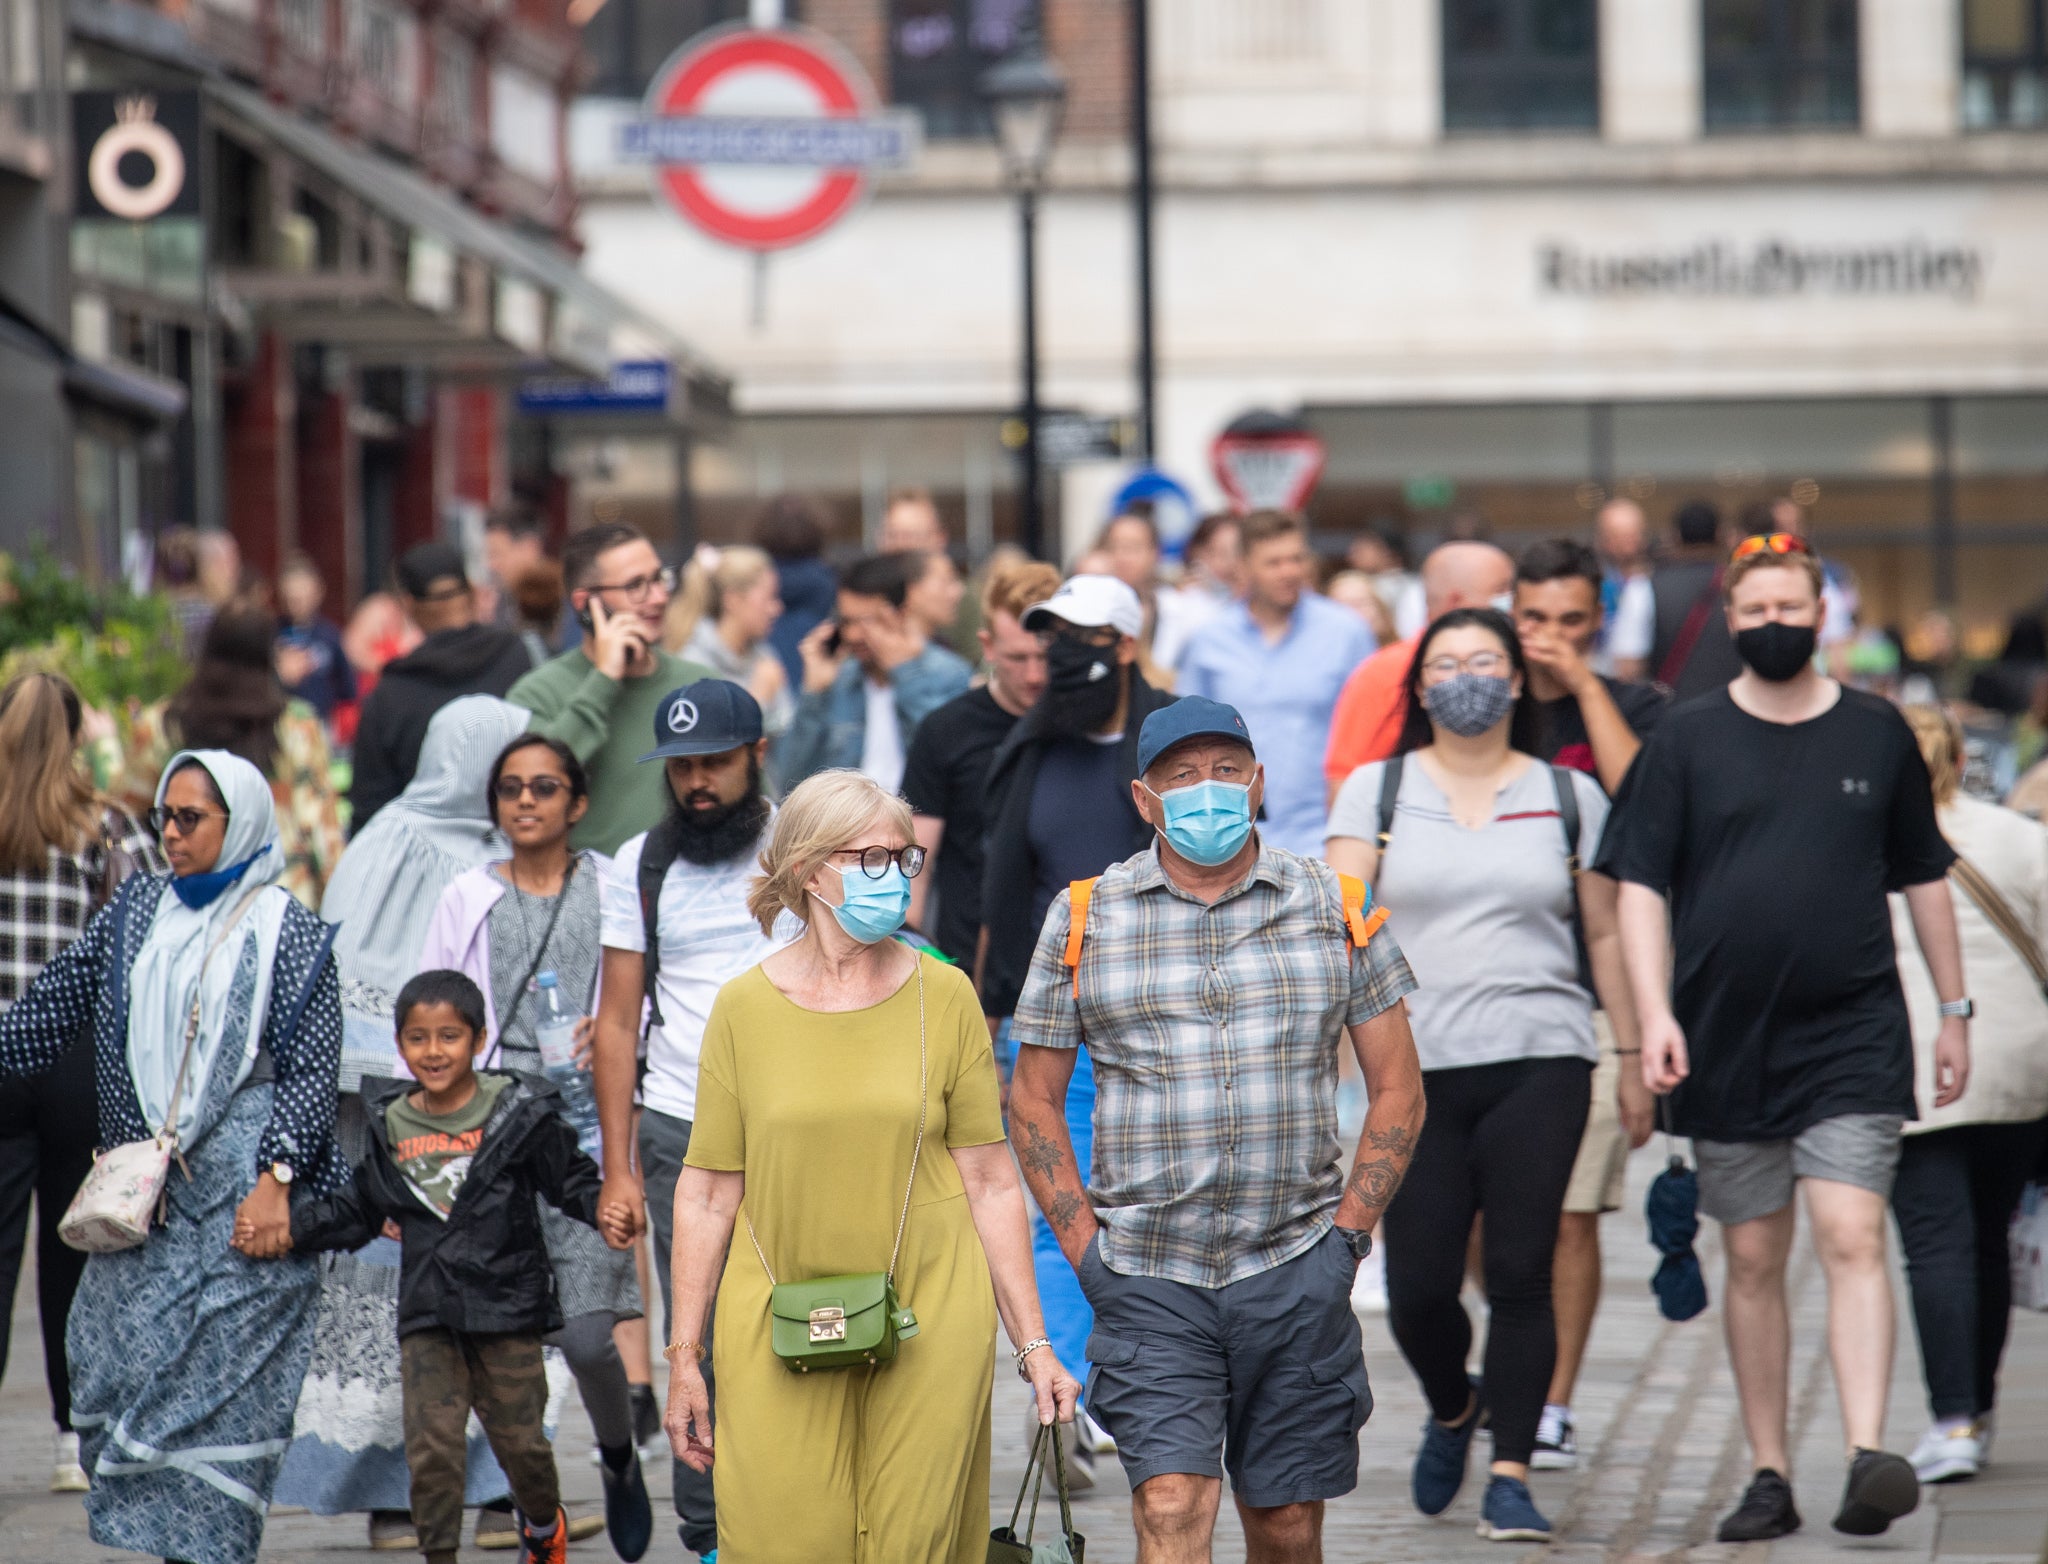 People wearing face masks among crowds of pedestrians in Covent Garden, London. (PA)